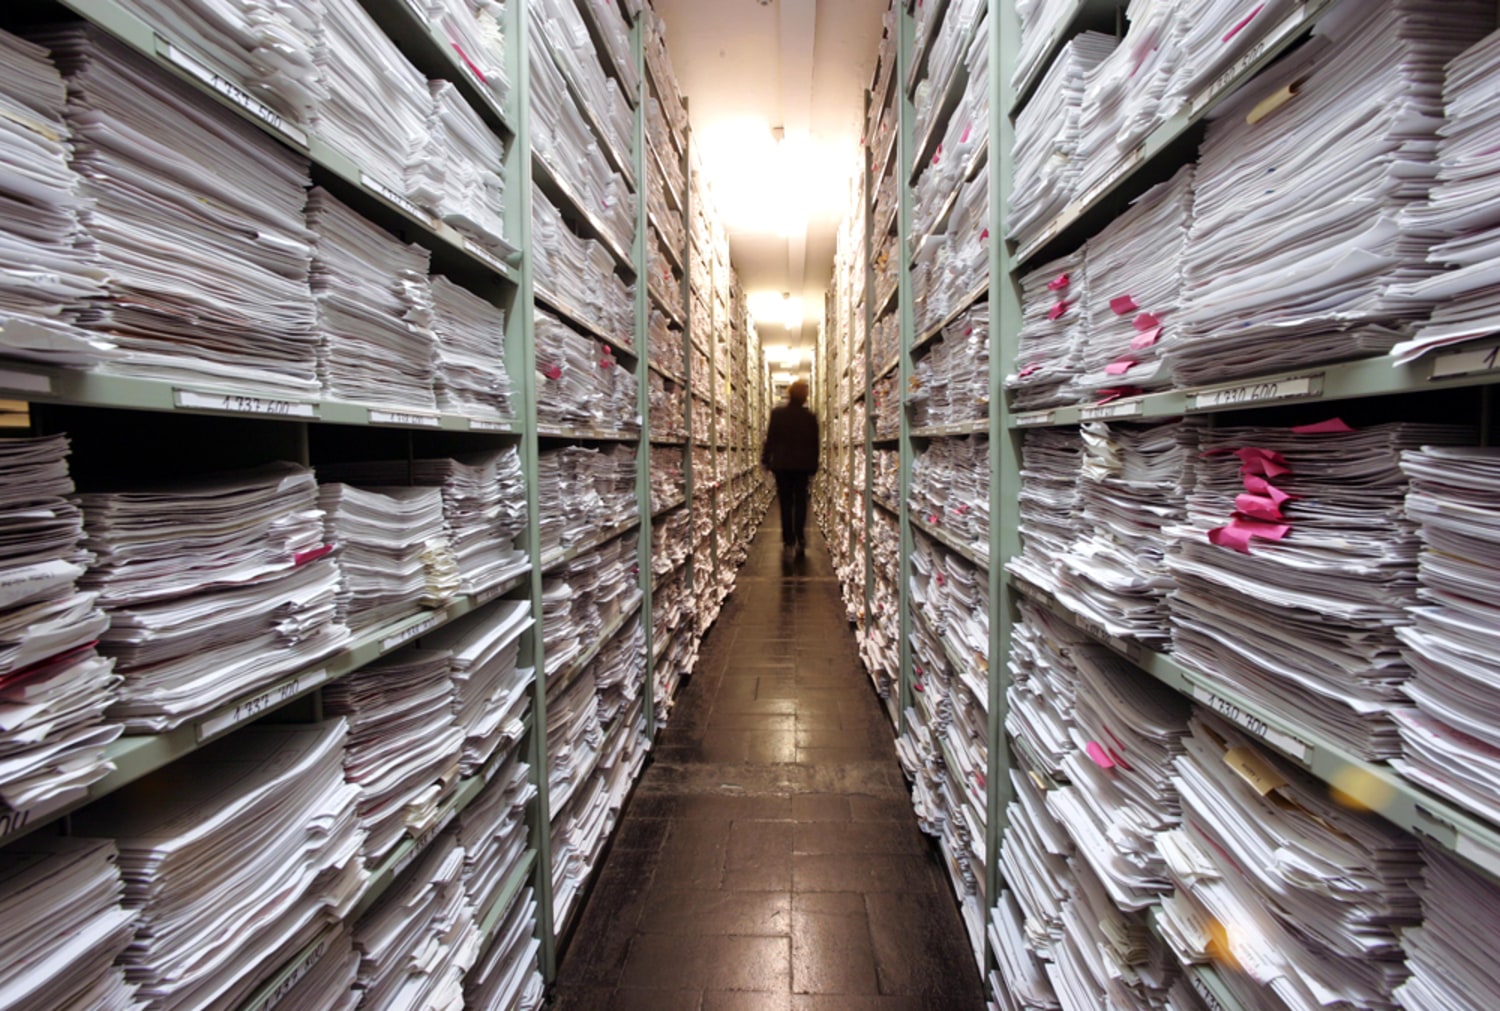 Vast Nazi archive opens to public after 60 years